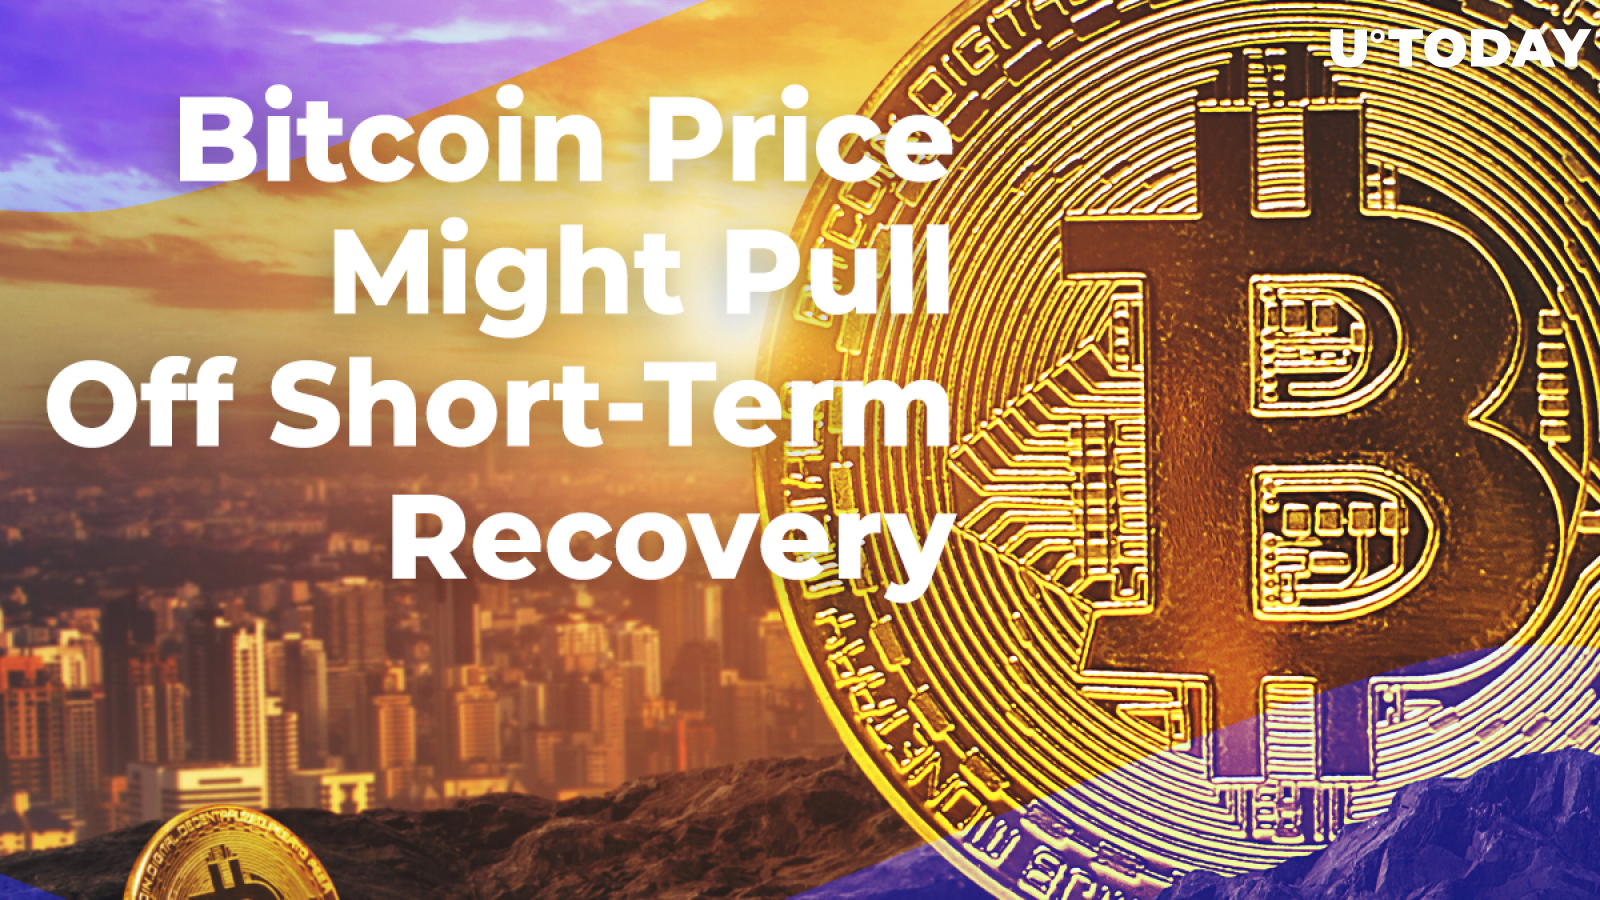 Bitcoin Price Might Pull Off Short-Term Recovery